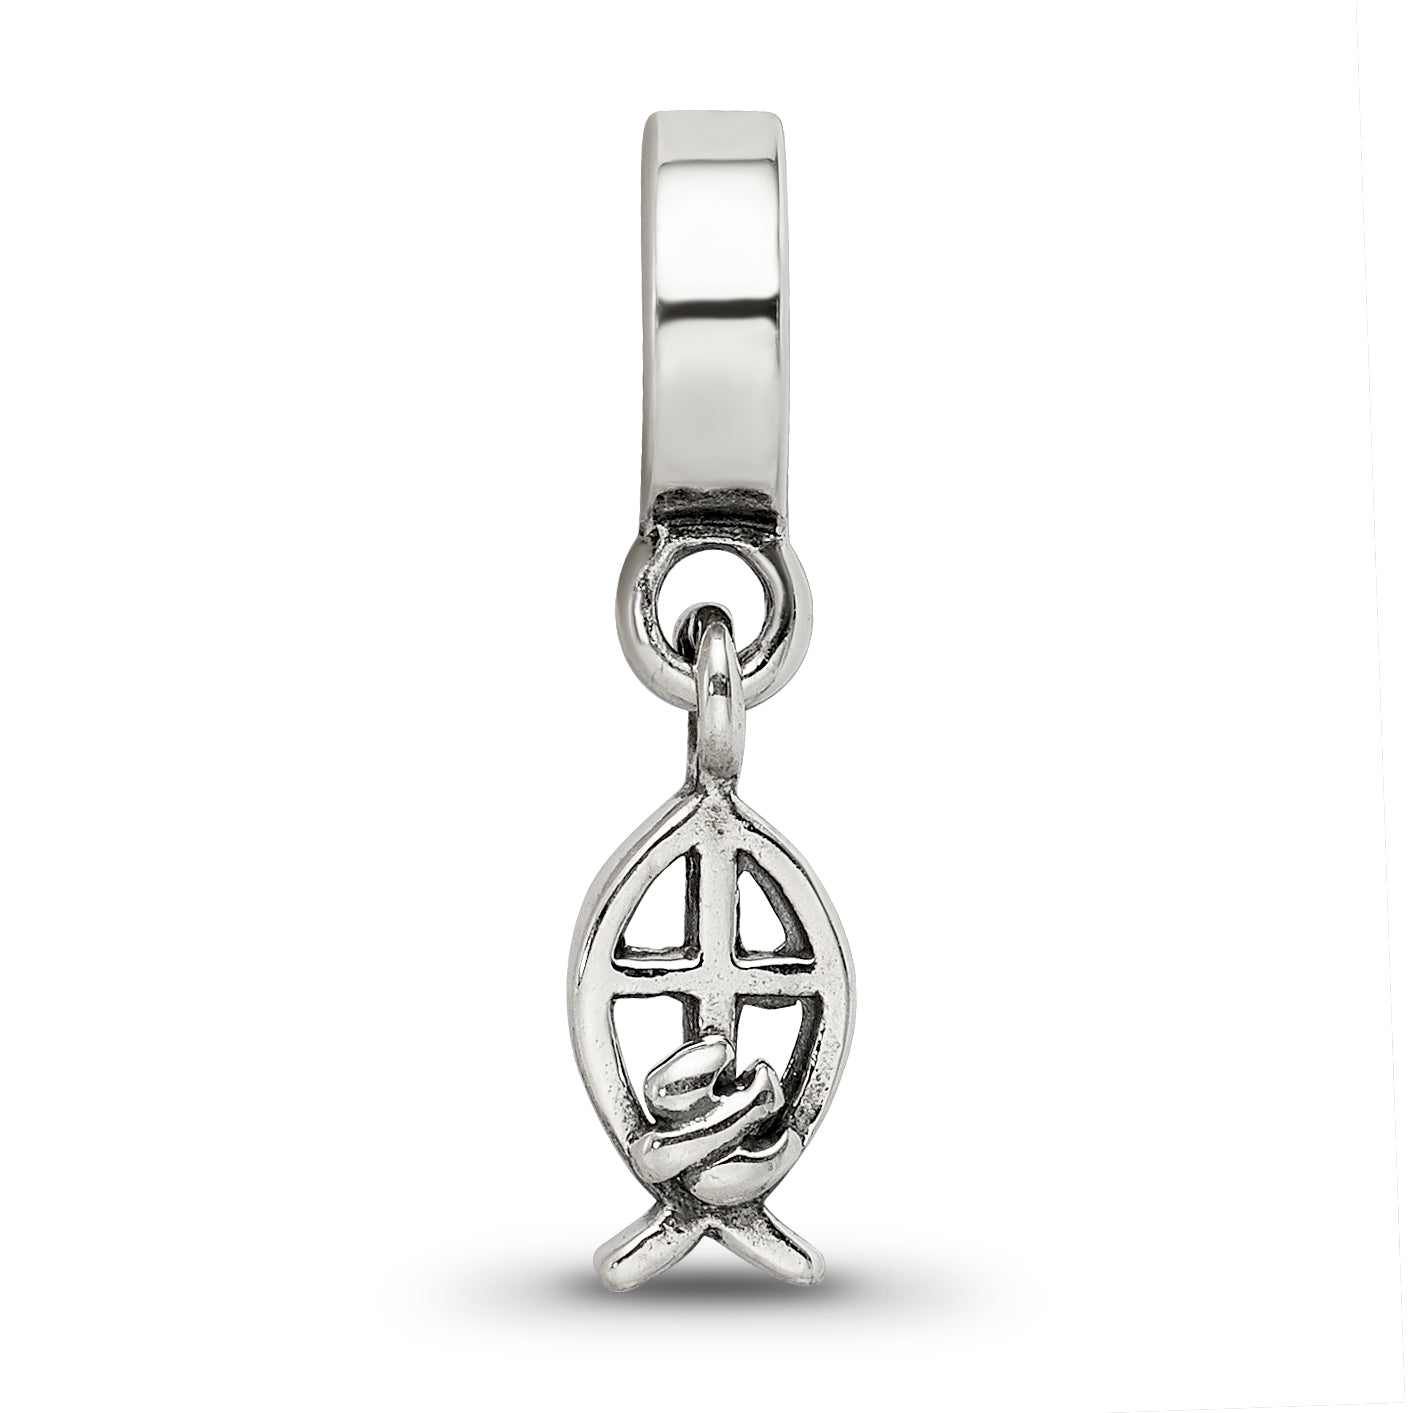 Sterling Silver Reflections Ichthus Dangle Bead